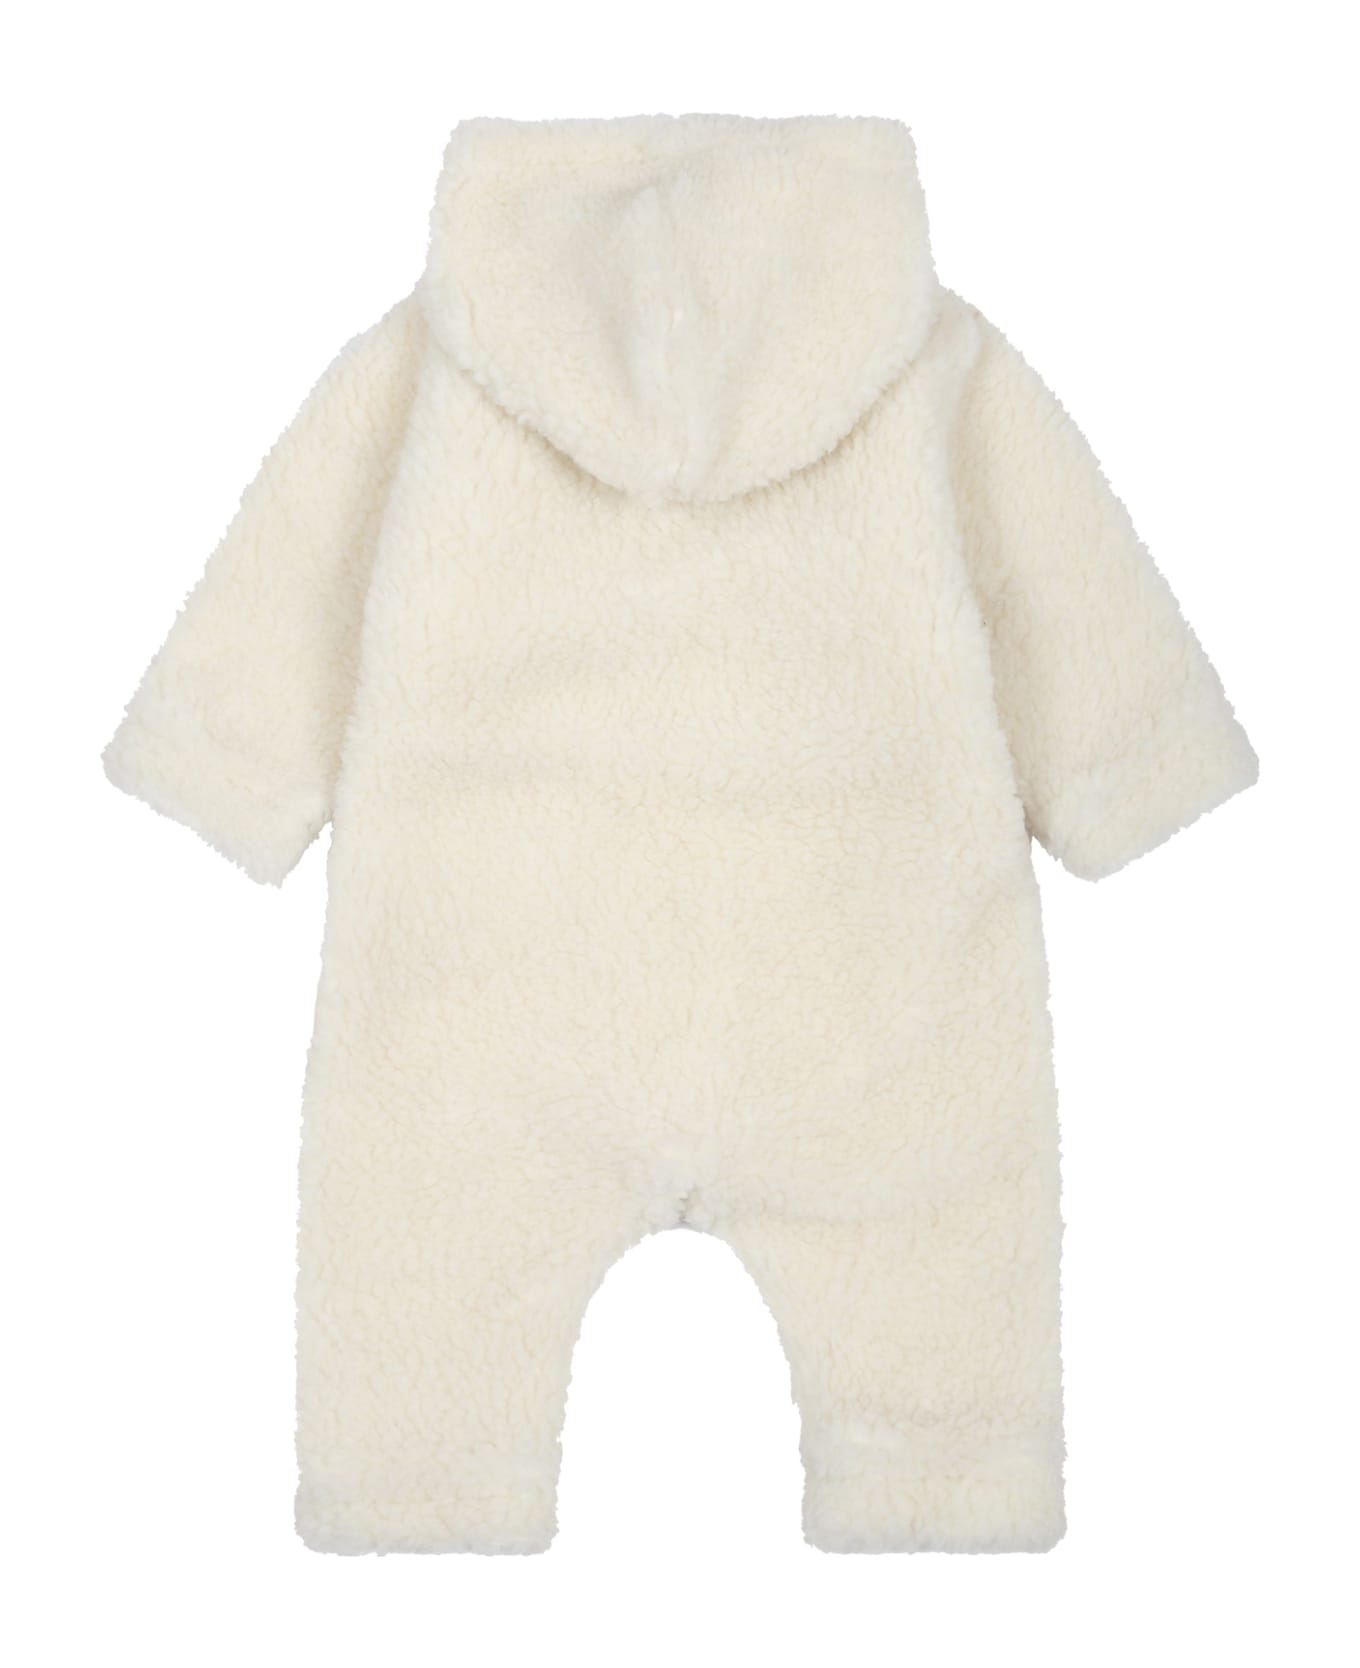 Moncler White Babygrow For Baby Kids With Logo